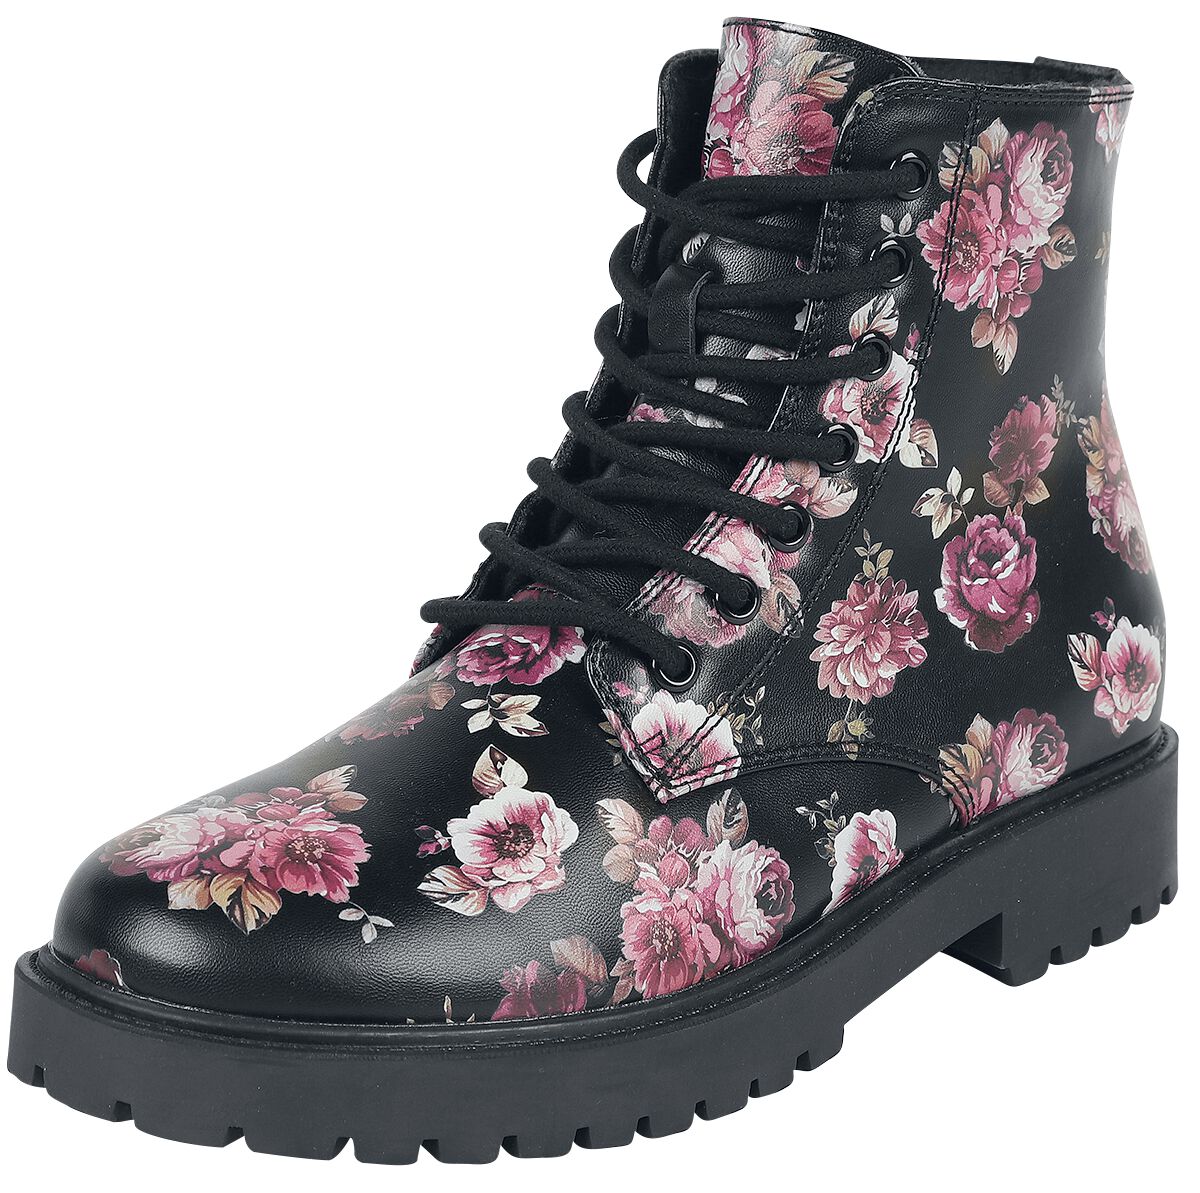 Image of Stivali di Rock Rebel by EMP - Black Lace-Up Boots with Floral All-Over Print - EU37 a EU41 - Donna - nero